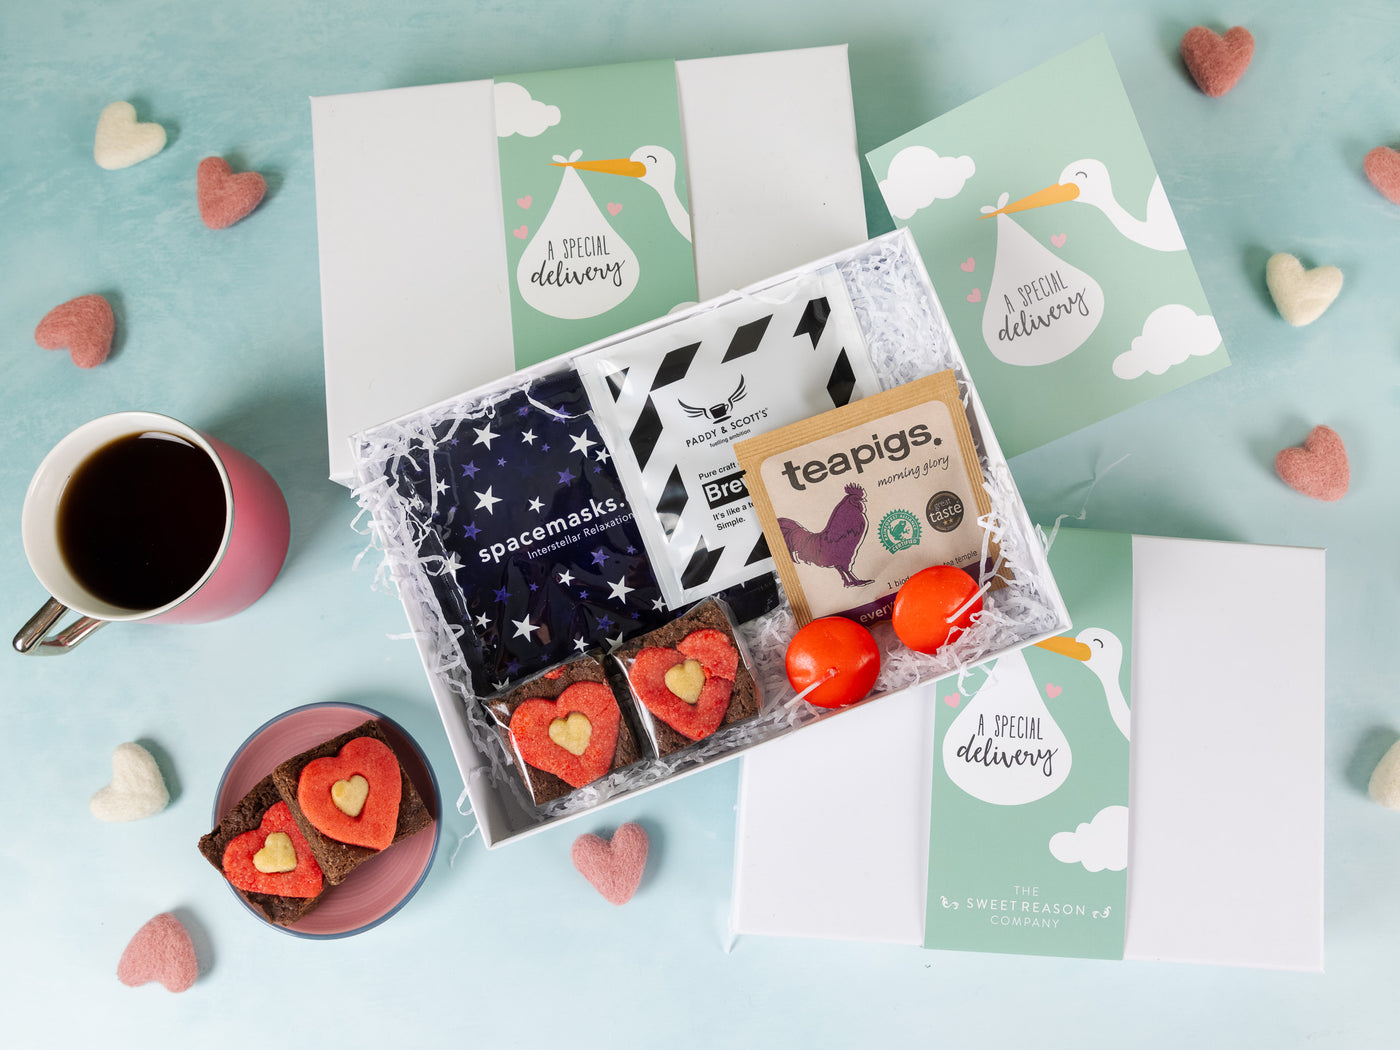 'A Special Delivery' Treats, Tea & Coffee Gift